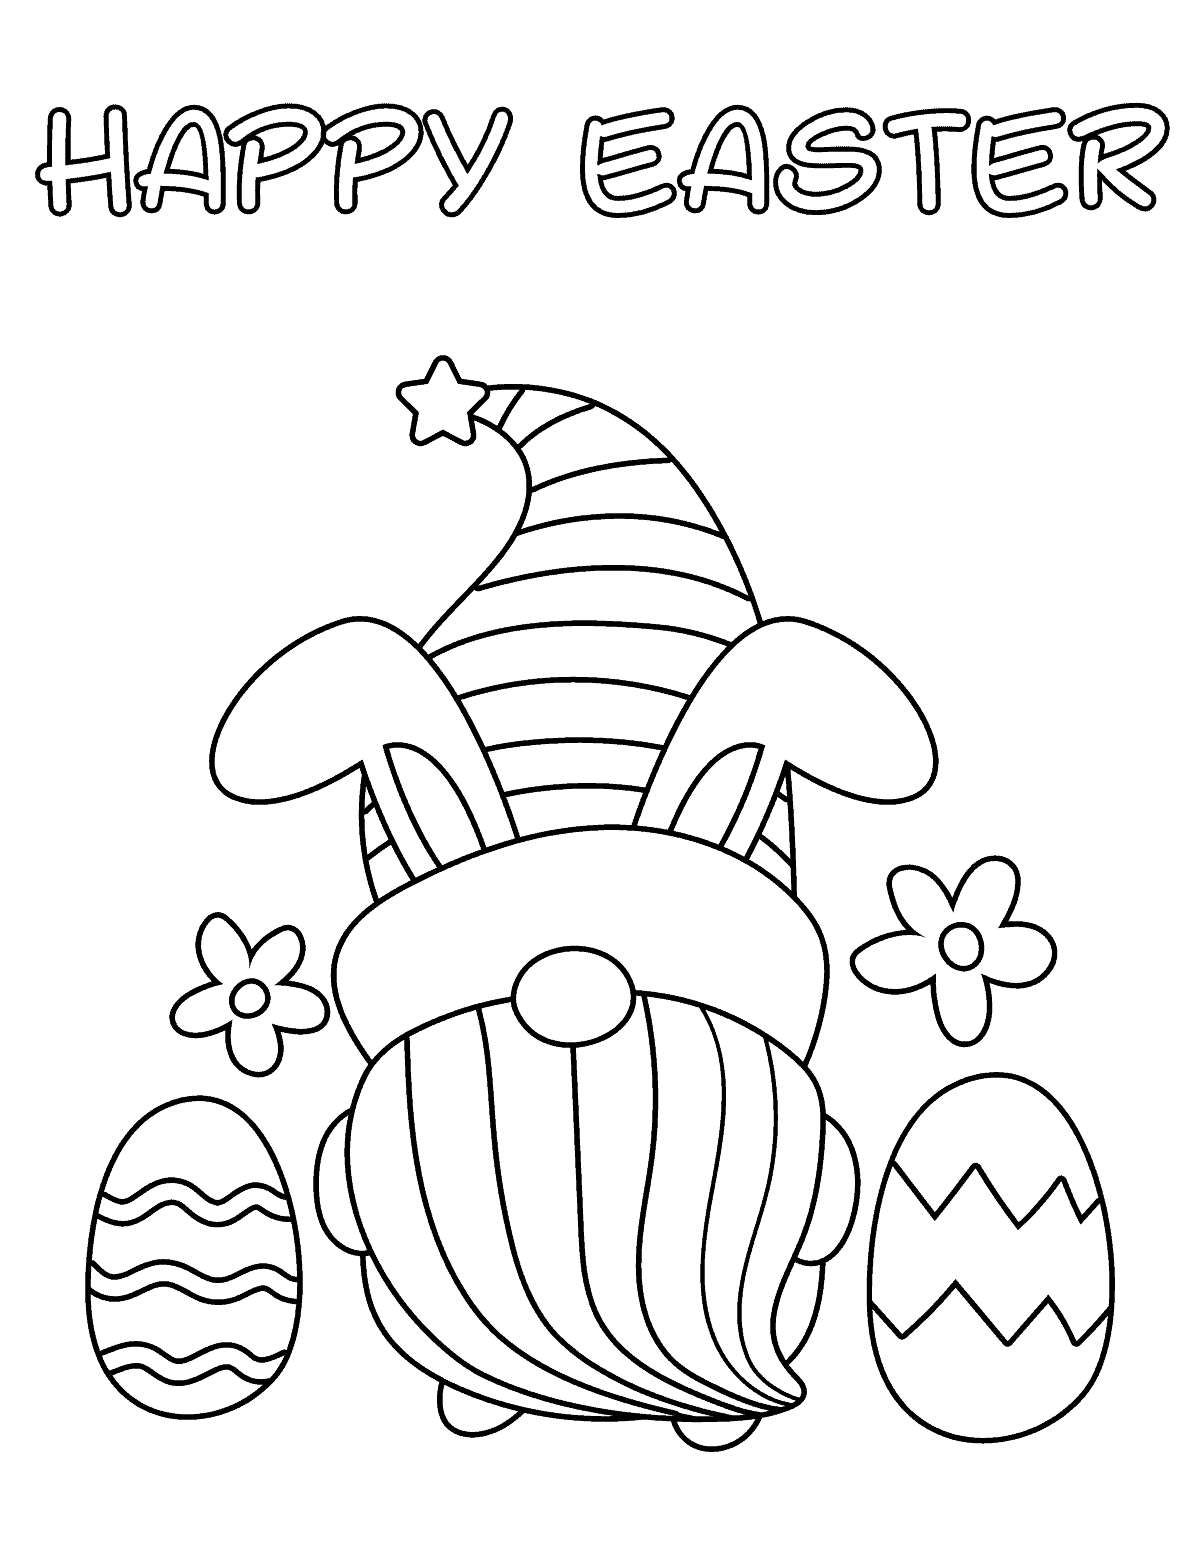 Cute Gnome Wearing Bunny Ears coloring Page